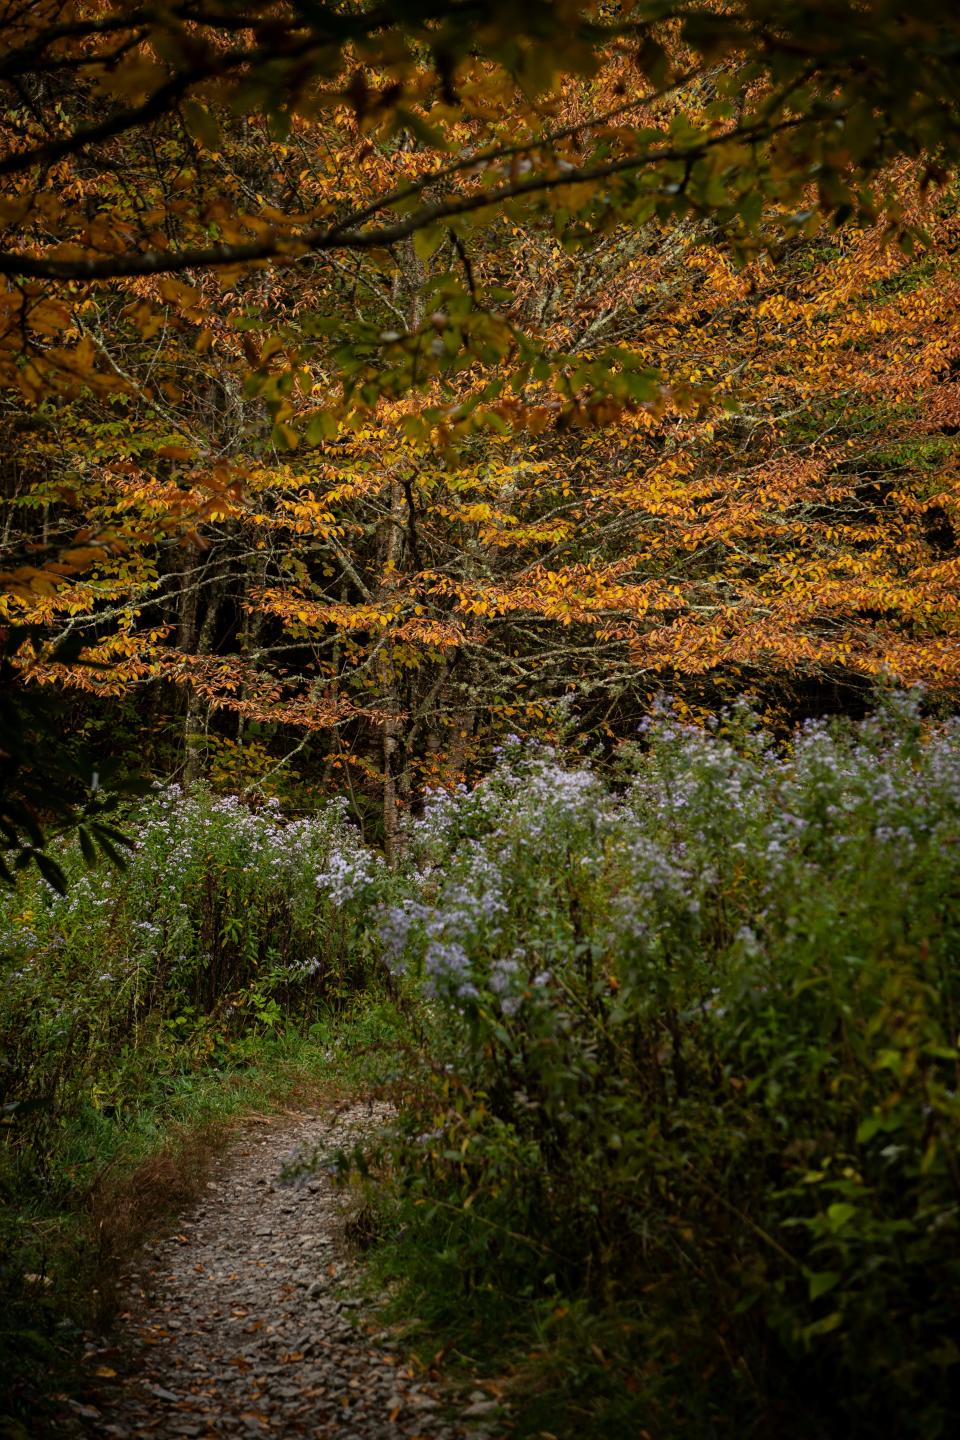 New England aster blooms under Autumn leaves along the Sam Knob Trail near the Blue Ridge Parkway, October 5, 2023.